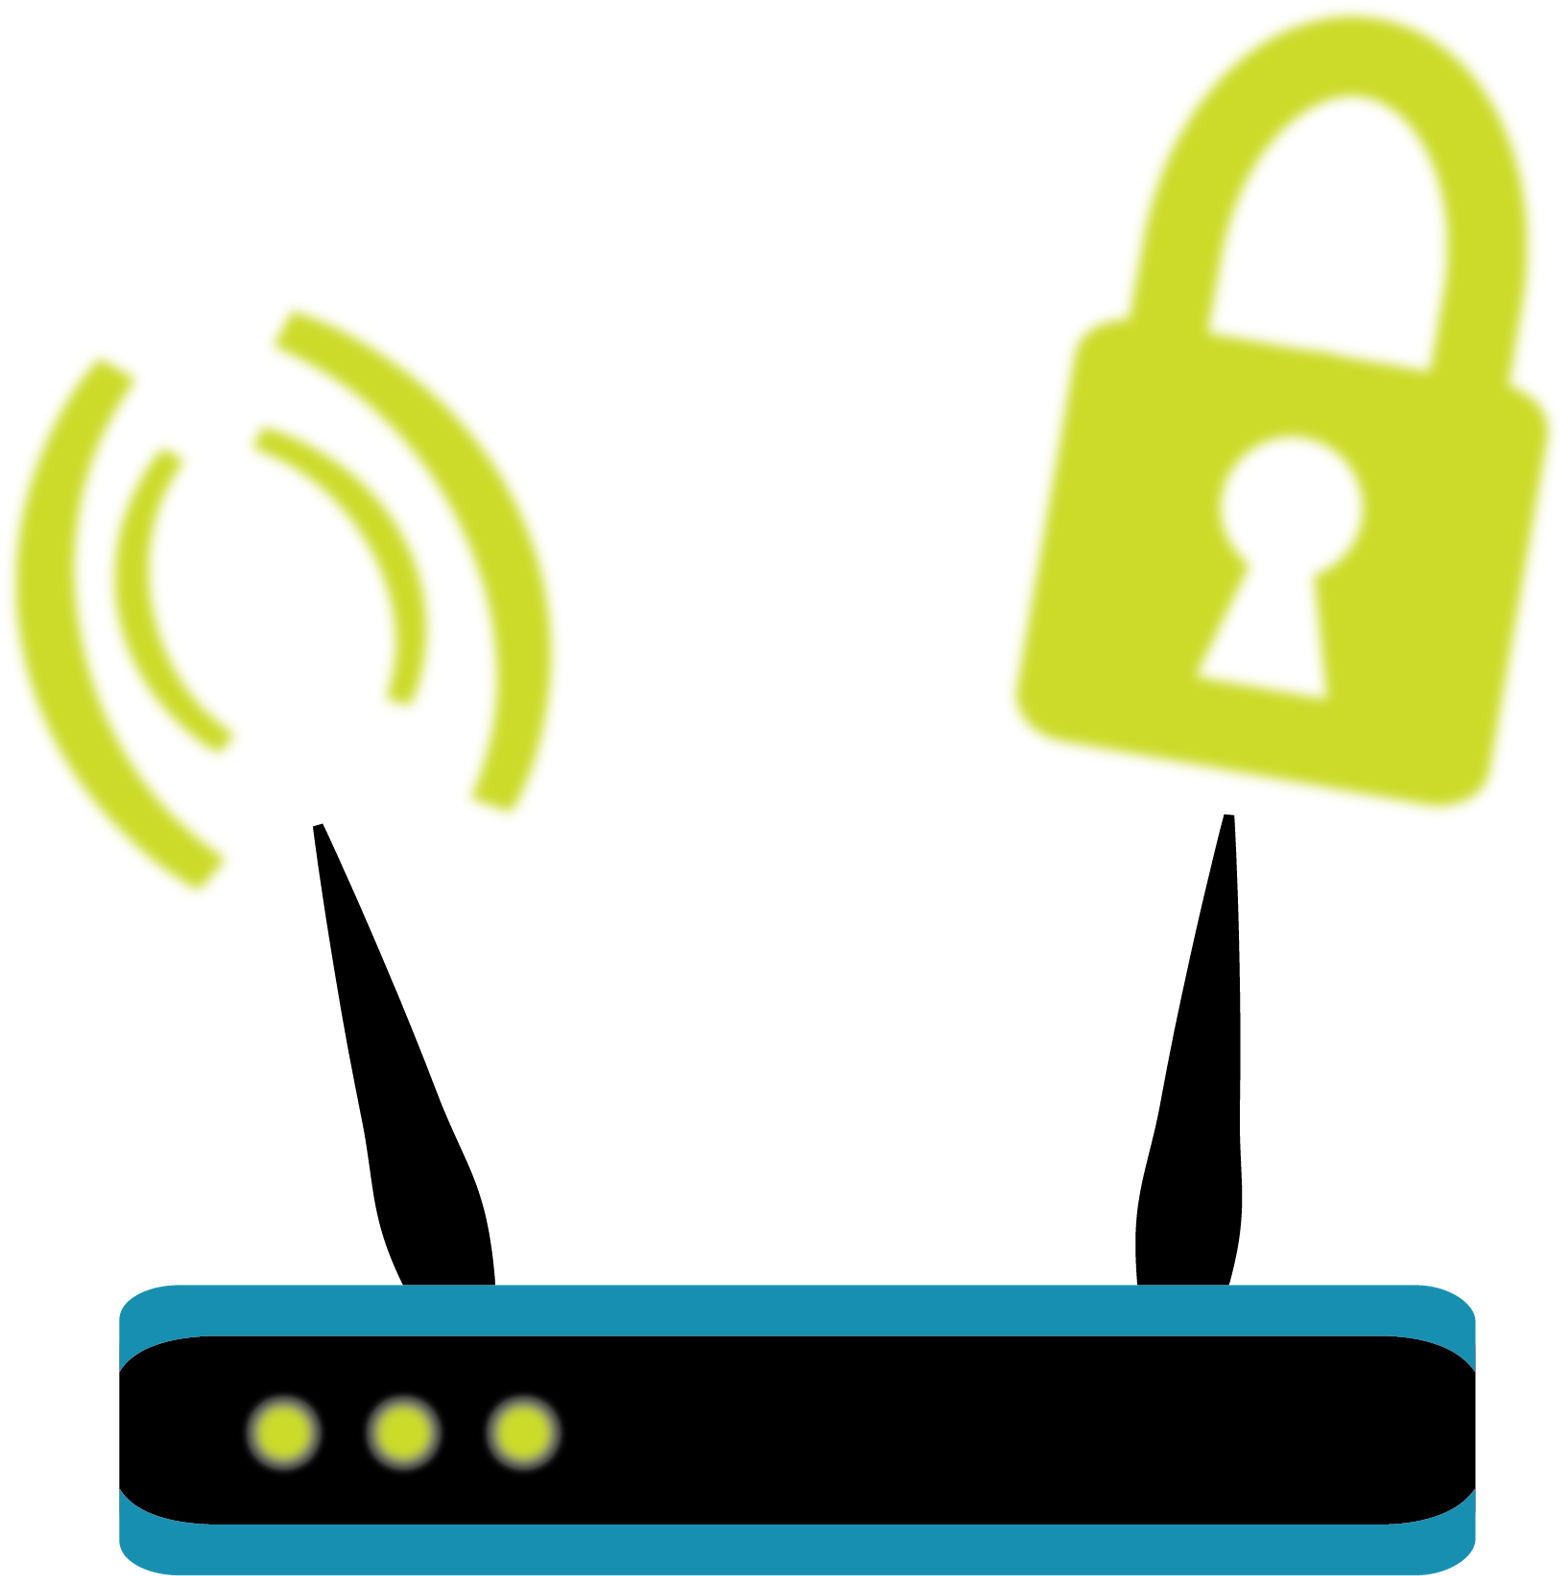 Secure Wireless Router Illustration PNG image